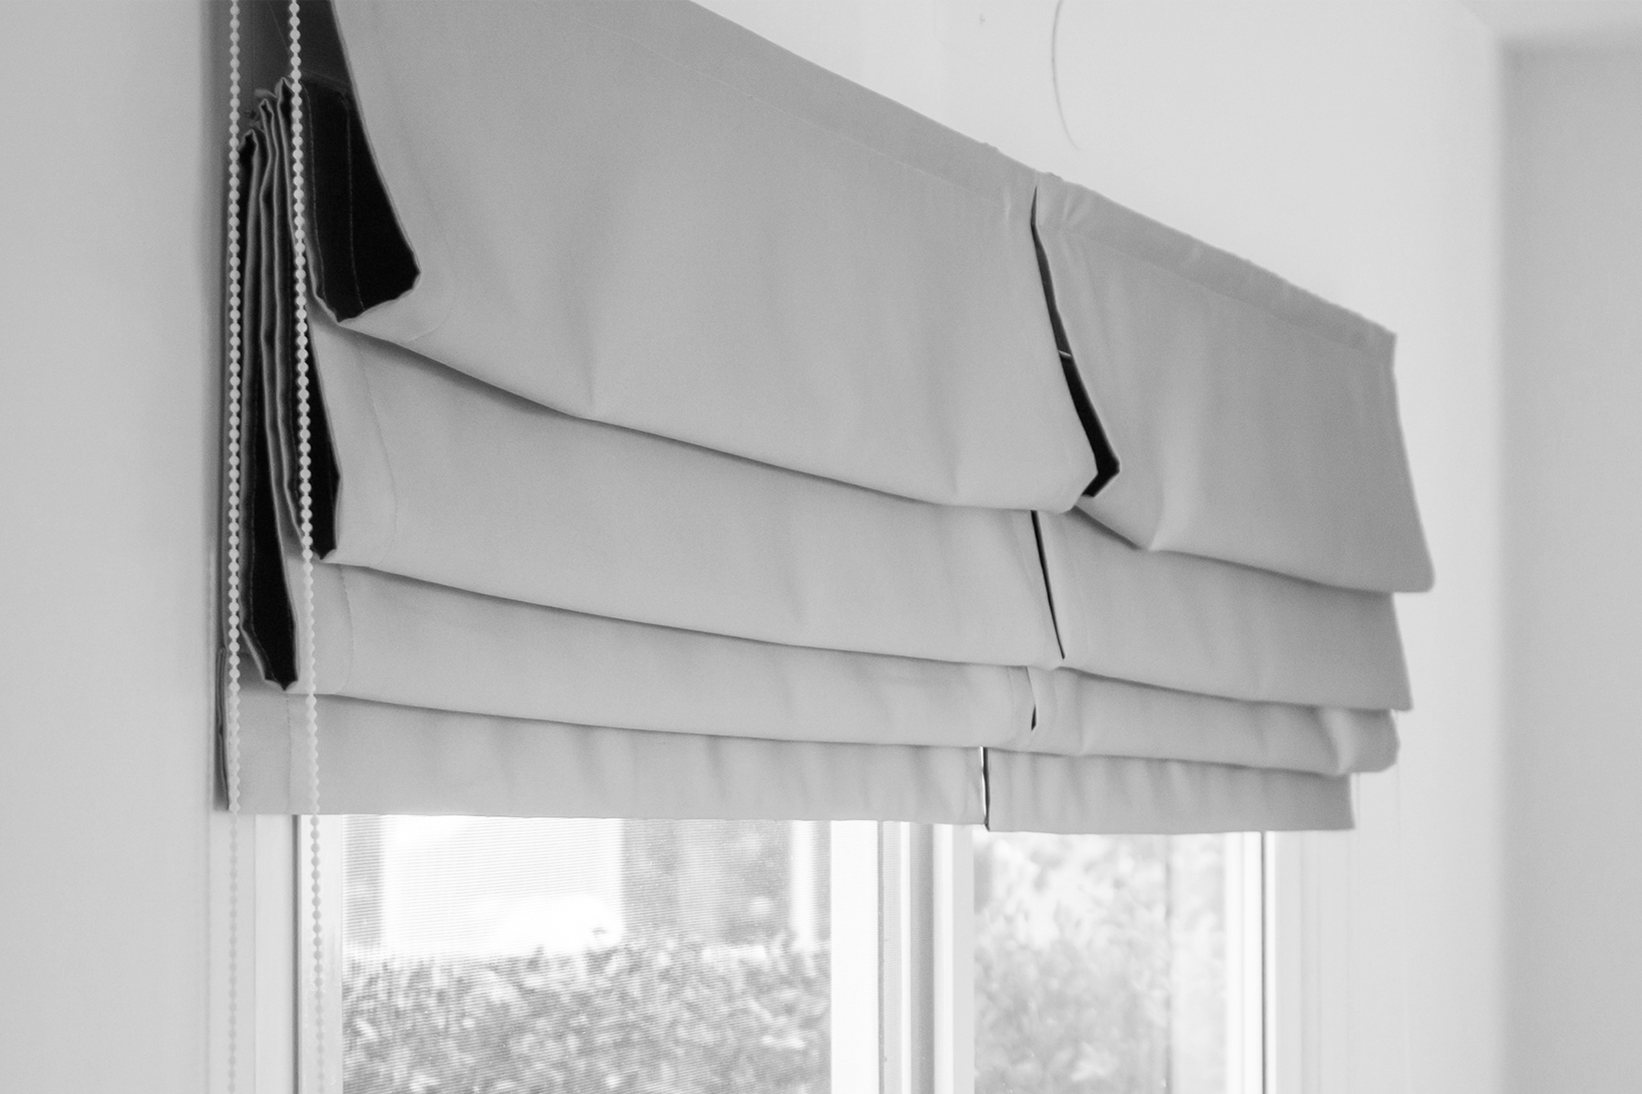 7400 electrical roman blind system Qurails